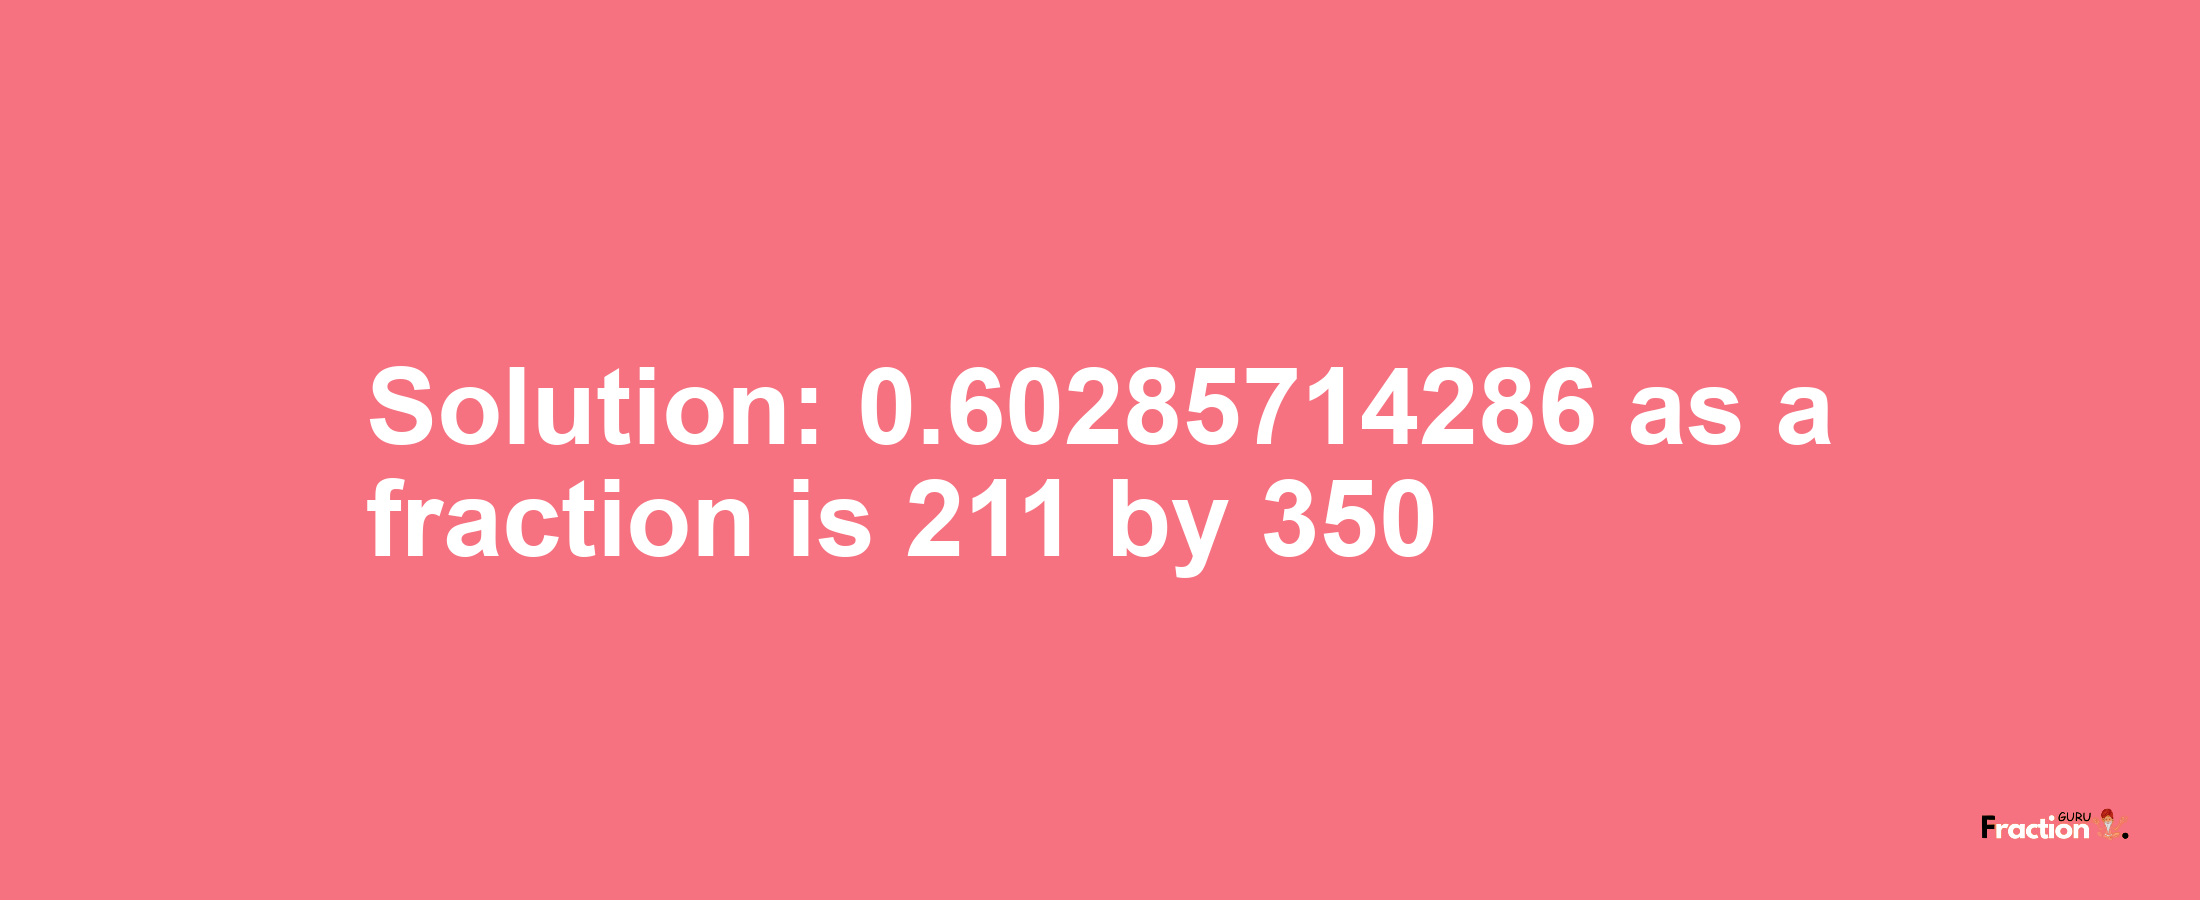 Solution:0.60285714286 as a fraction is 211/350